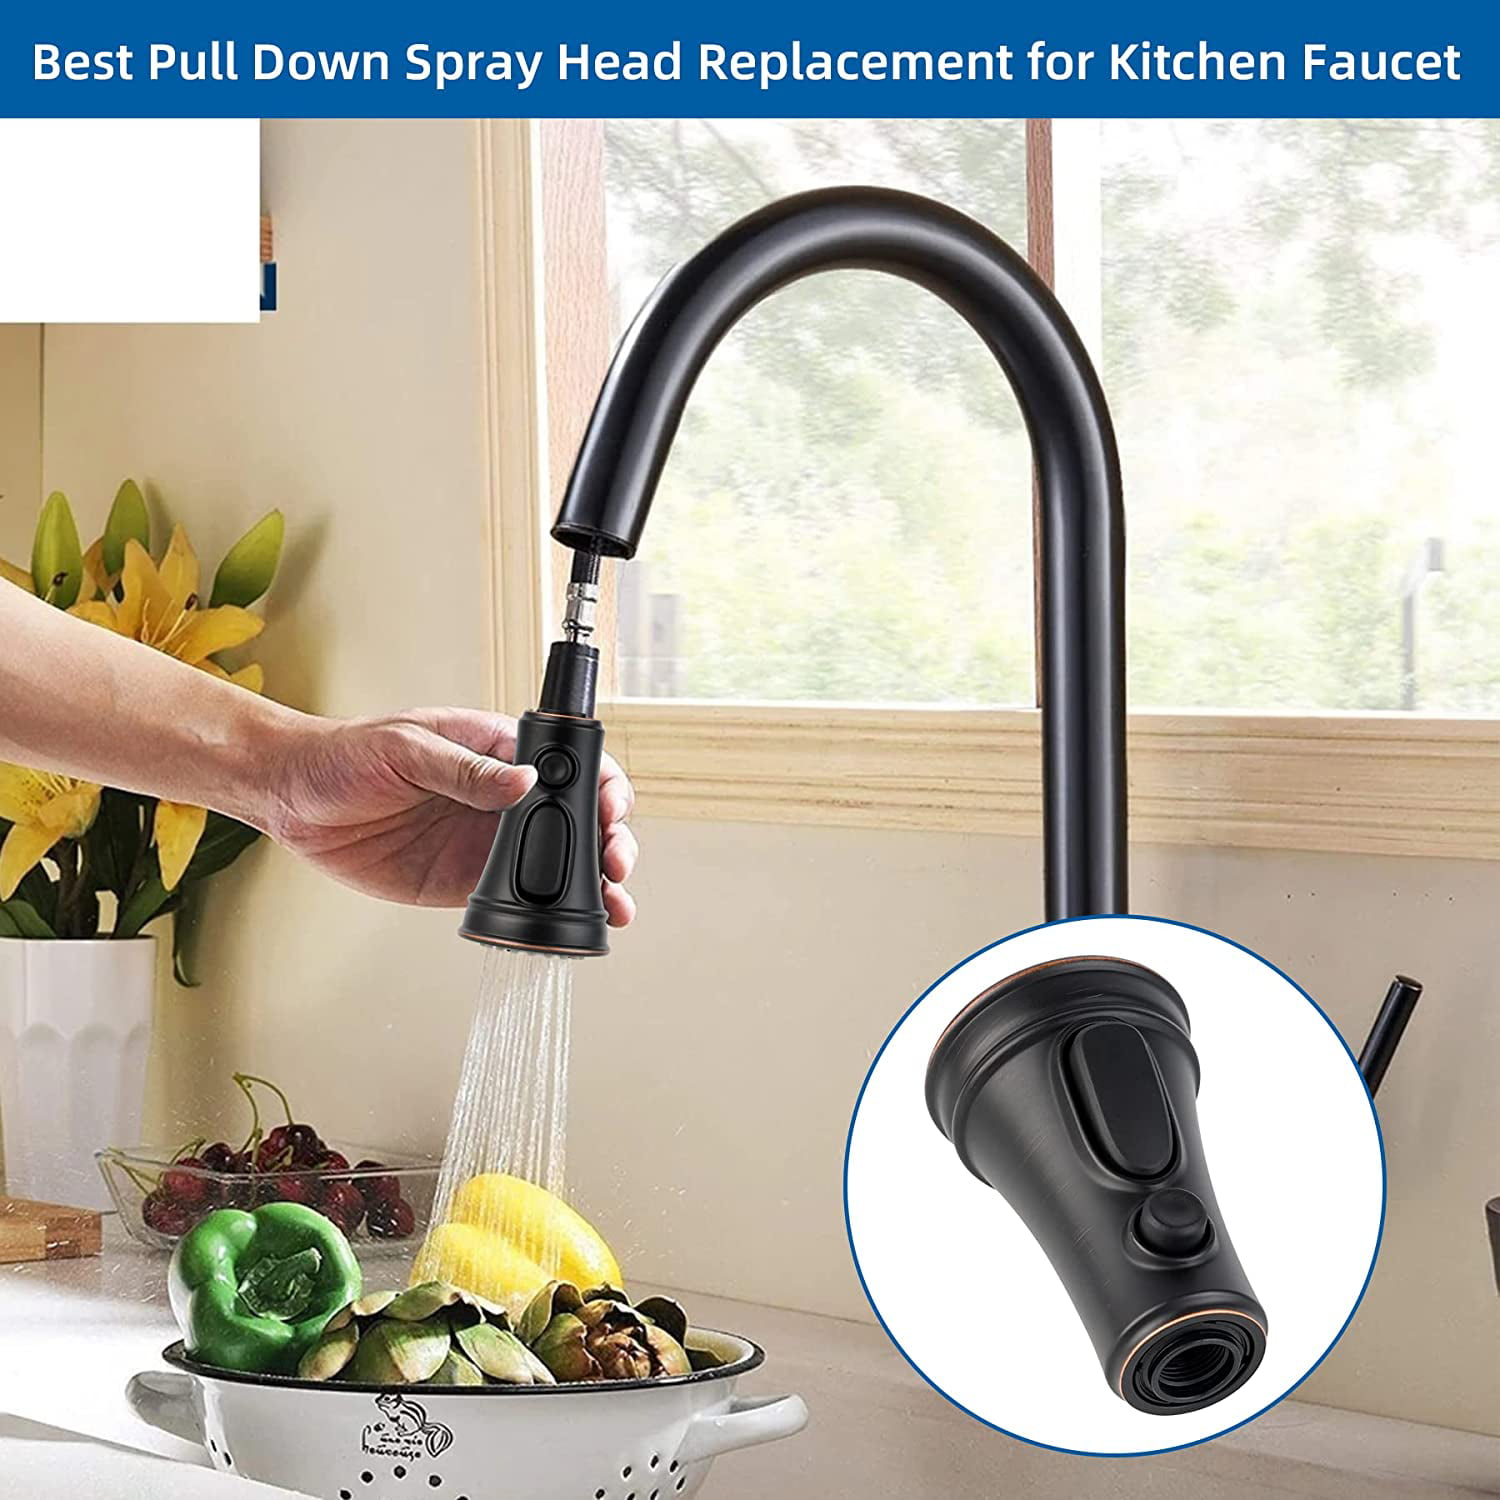 How to Clean a Faucet Head: 5+ Hacks for 2023